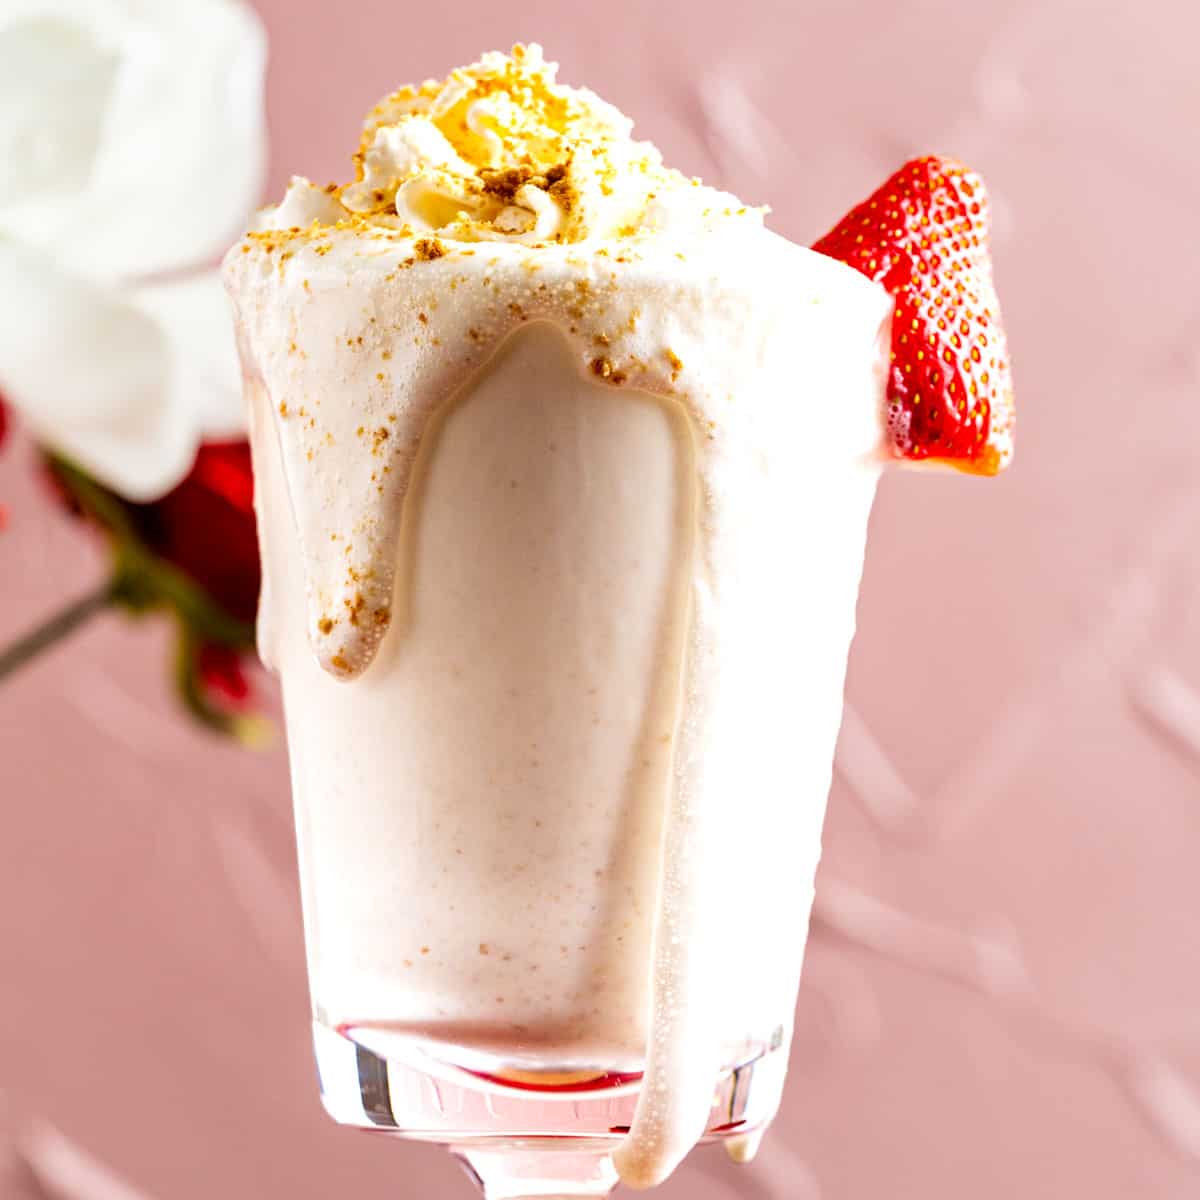 cheesecake milkshake in a tall glass with a strawberry on the side.